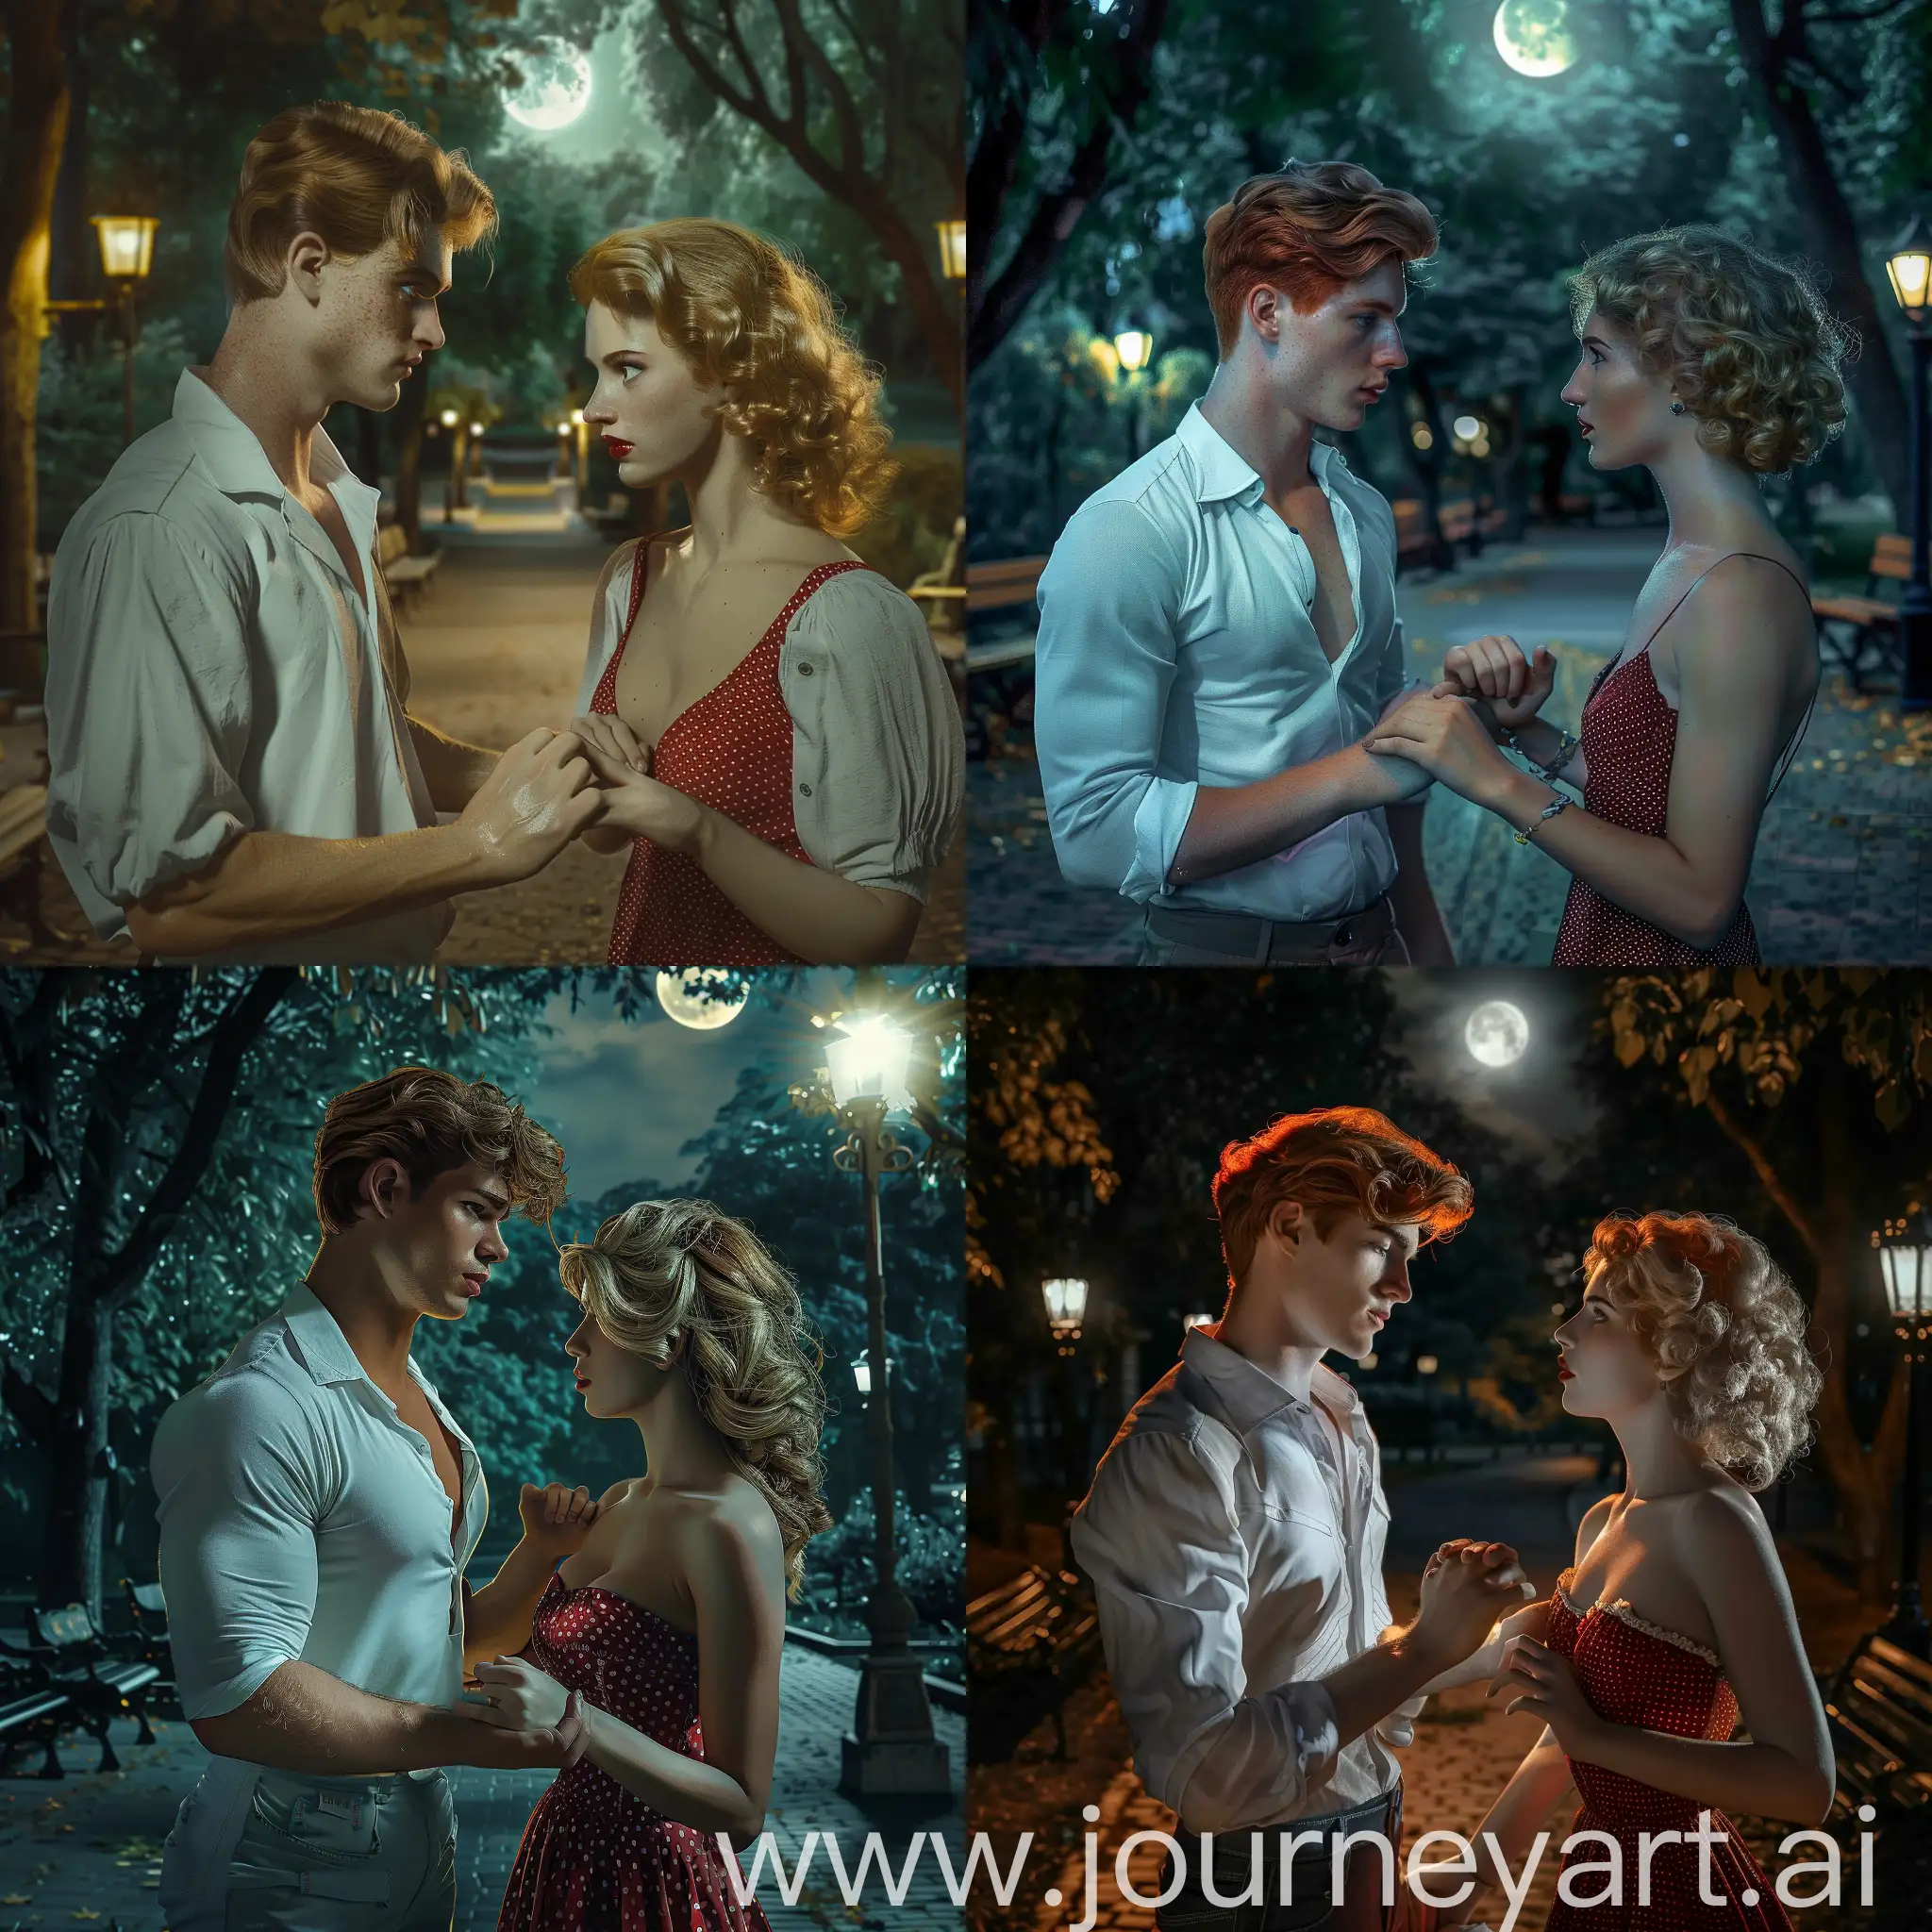 Romantic-Moonlit-Stroll-Passionate-Love-in-a-Nighttime-Park